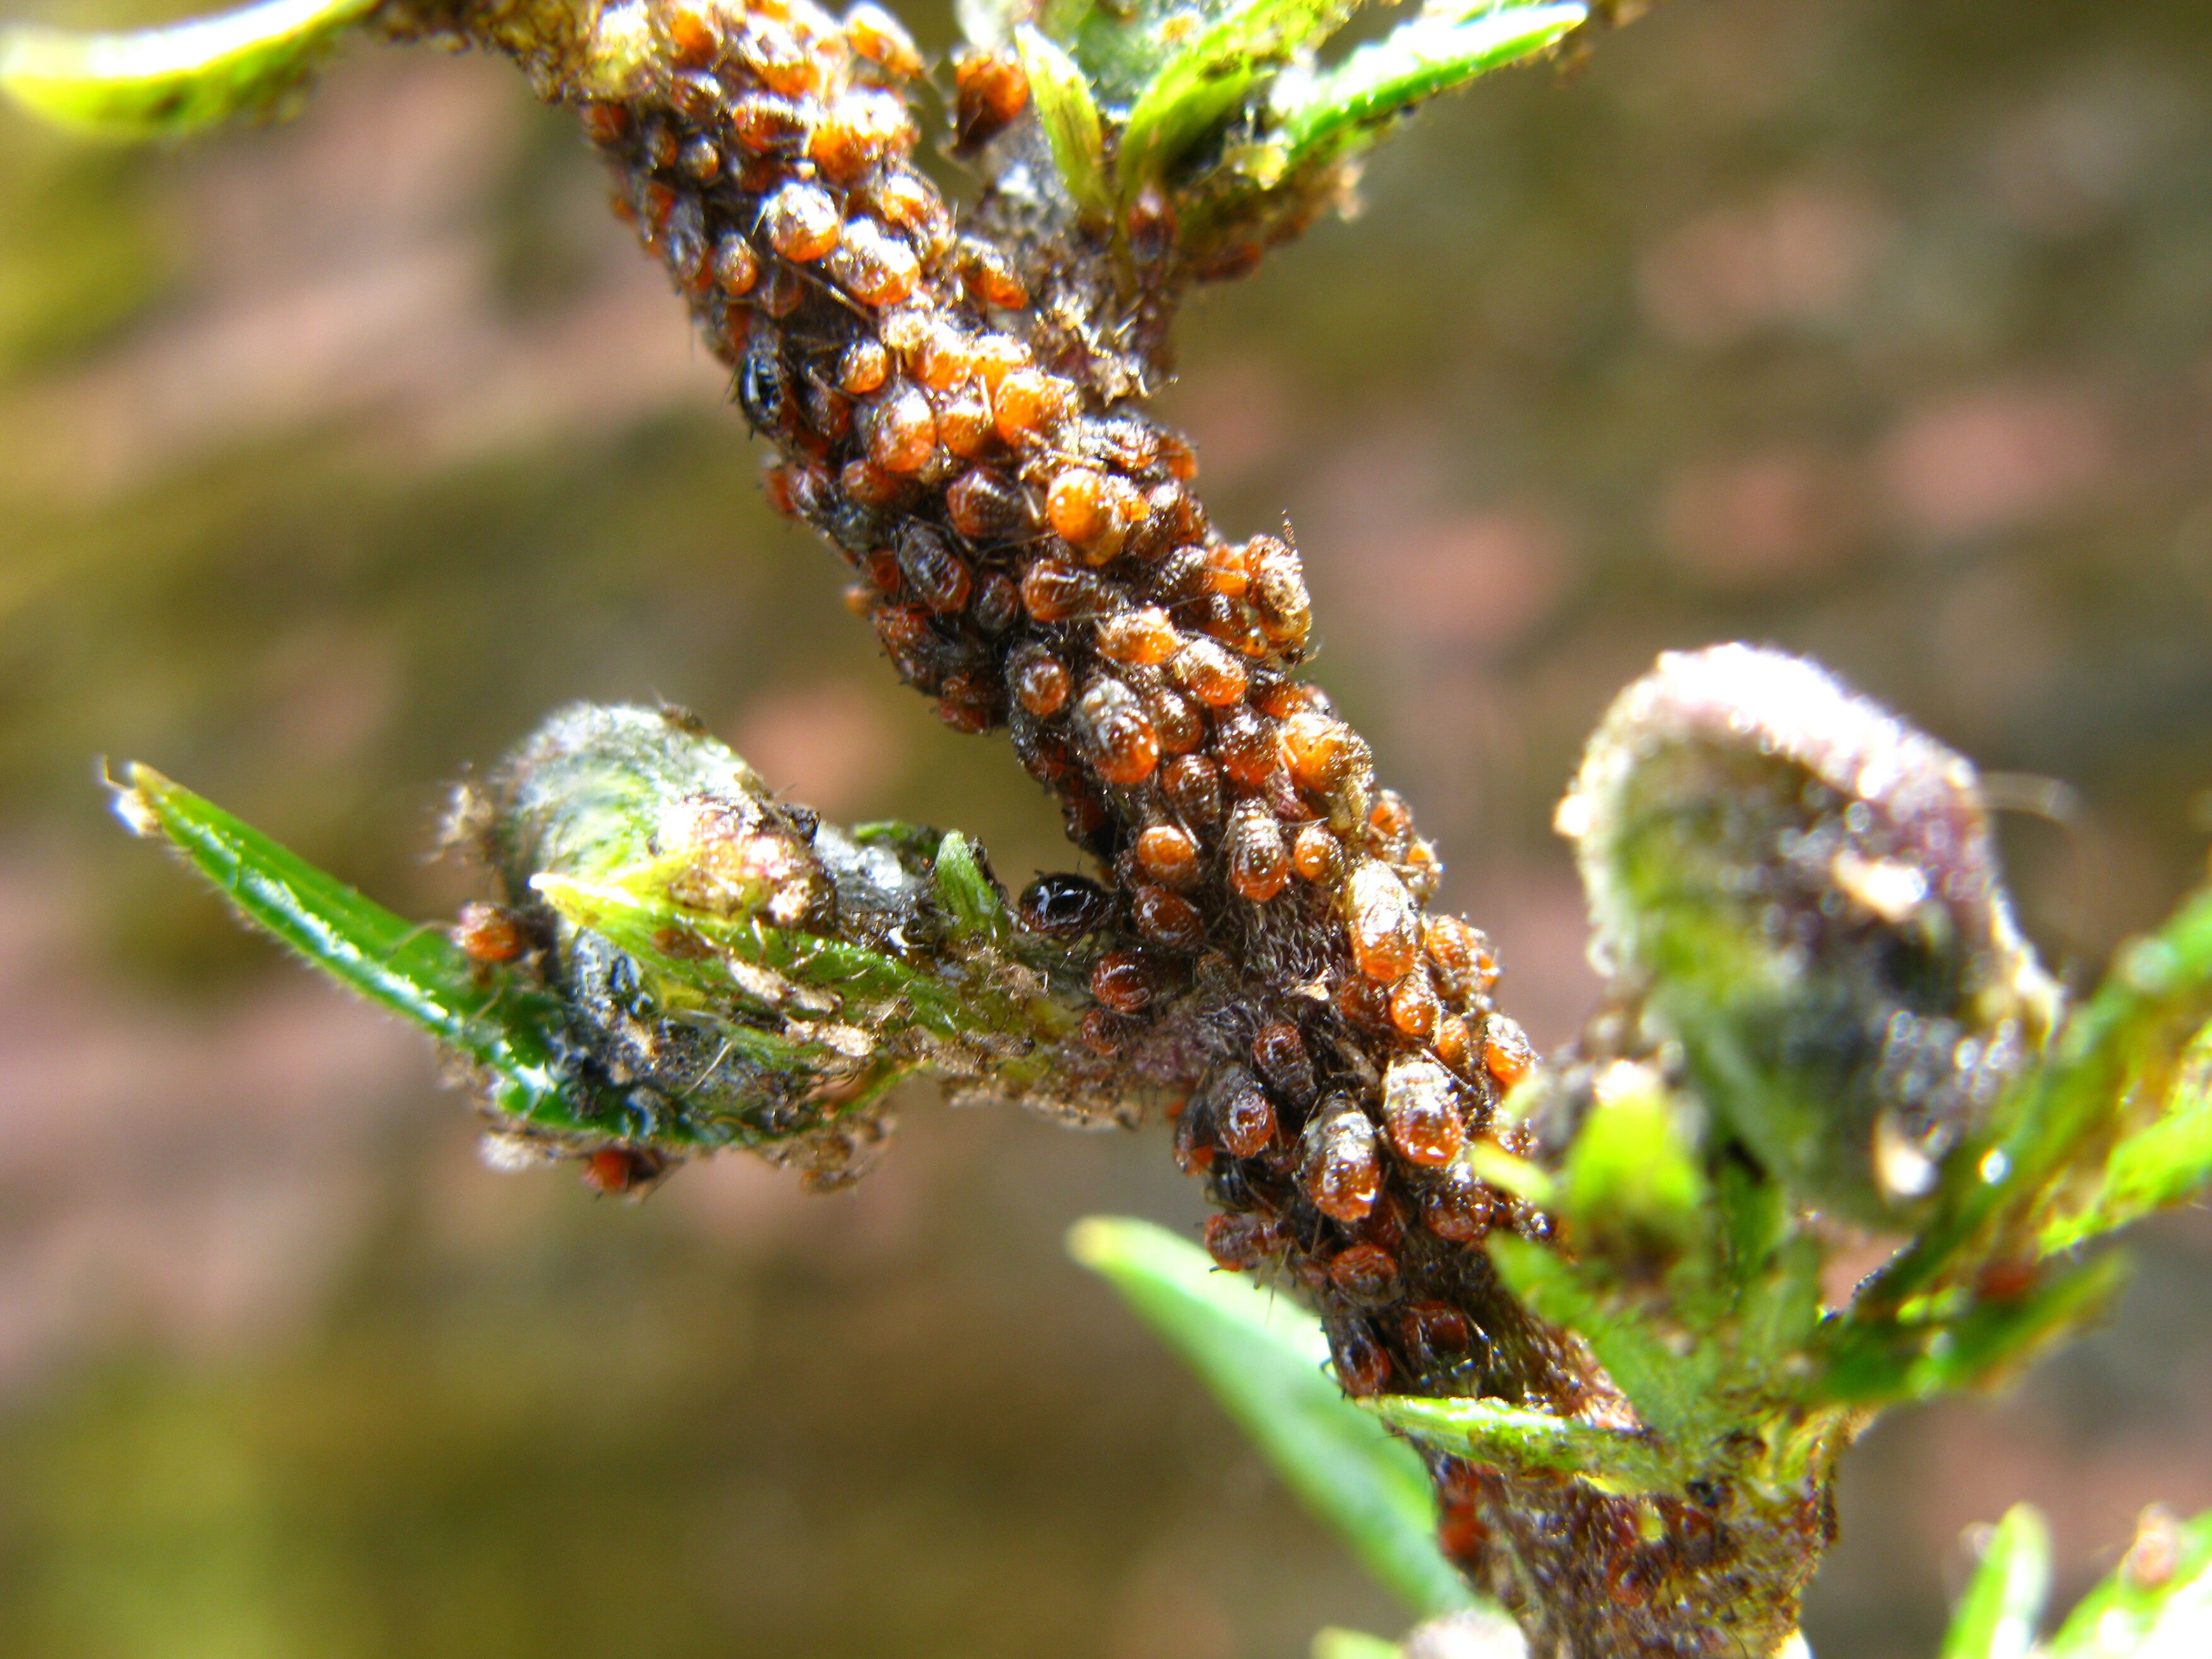 Aphids on a plant stem (Andrew Halstead/RHS/PA)